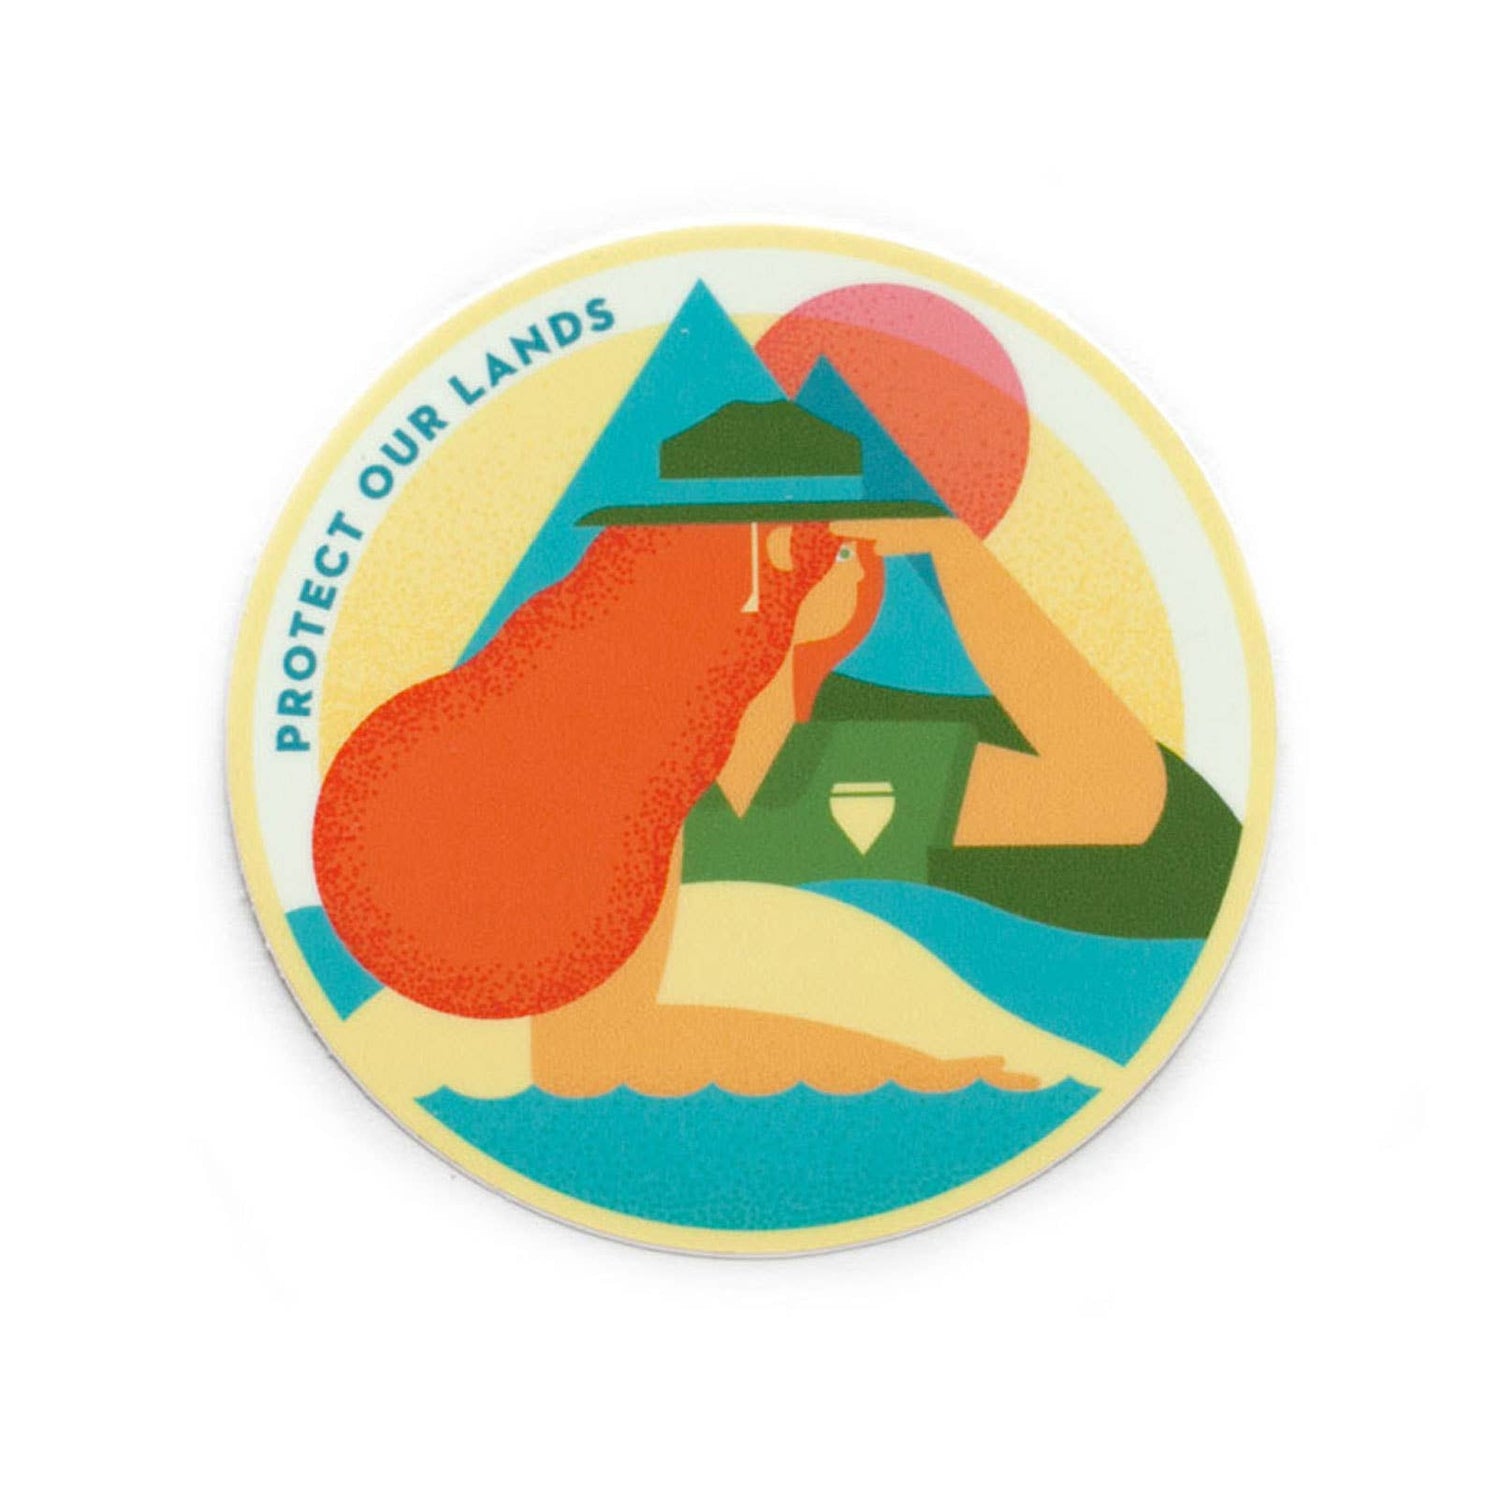 Round Lady Ranger sticker that reads "Protect our Lands" by Ello There